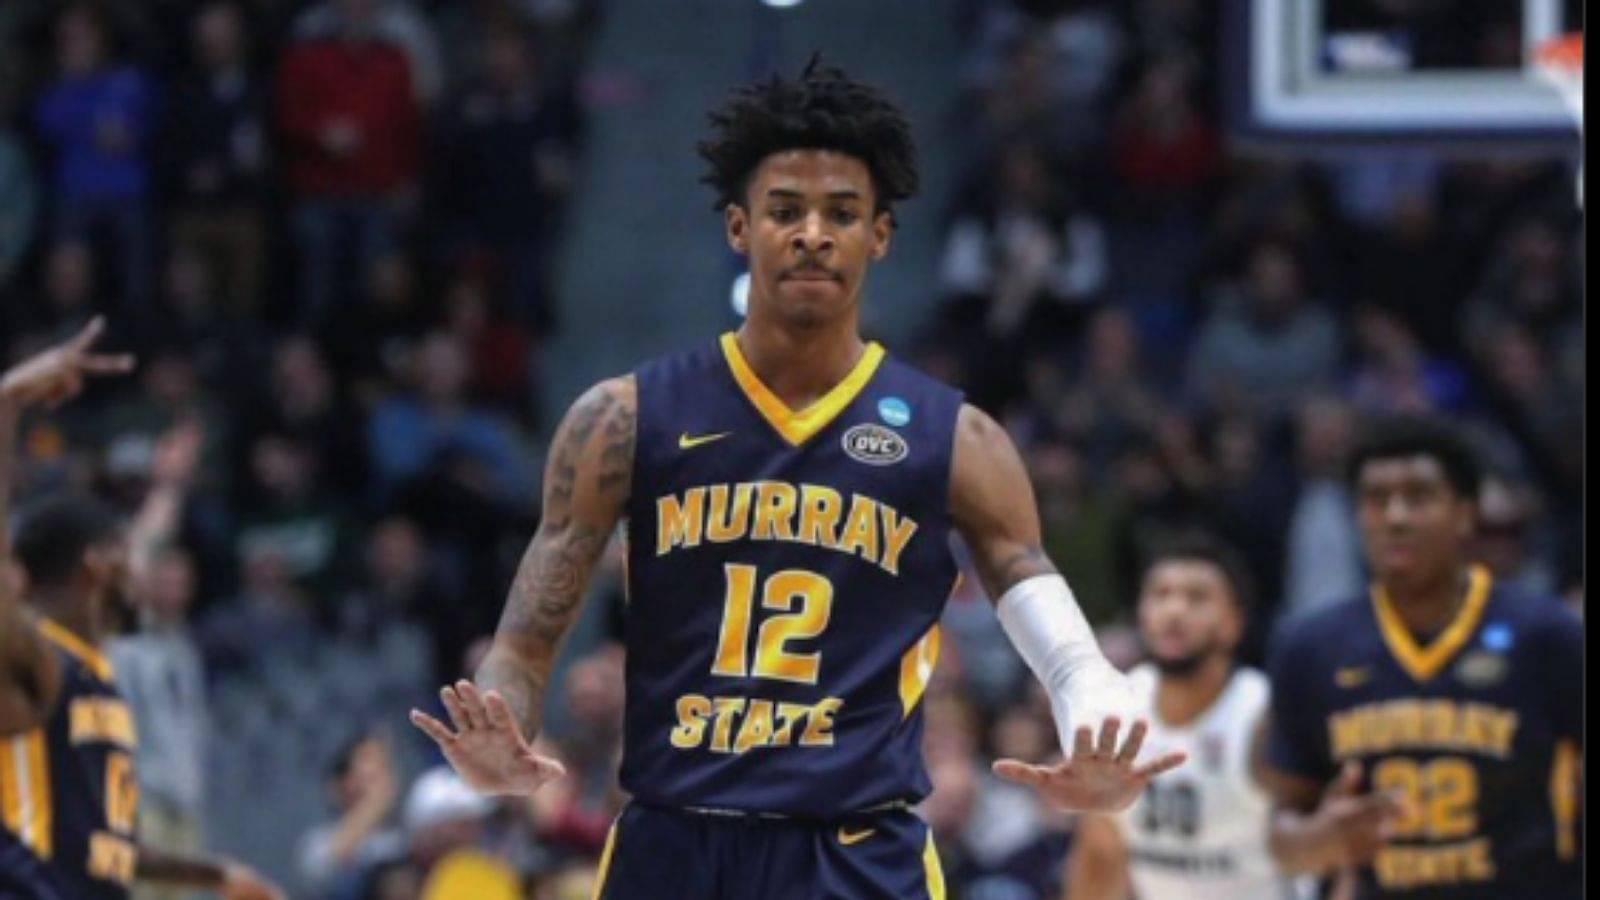 "Murray State guard leaps over 6'8 defender for a monster dunk!": When a 6'3 Ja Morant posterized a UT Martin power forward in the most atrocious fashion